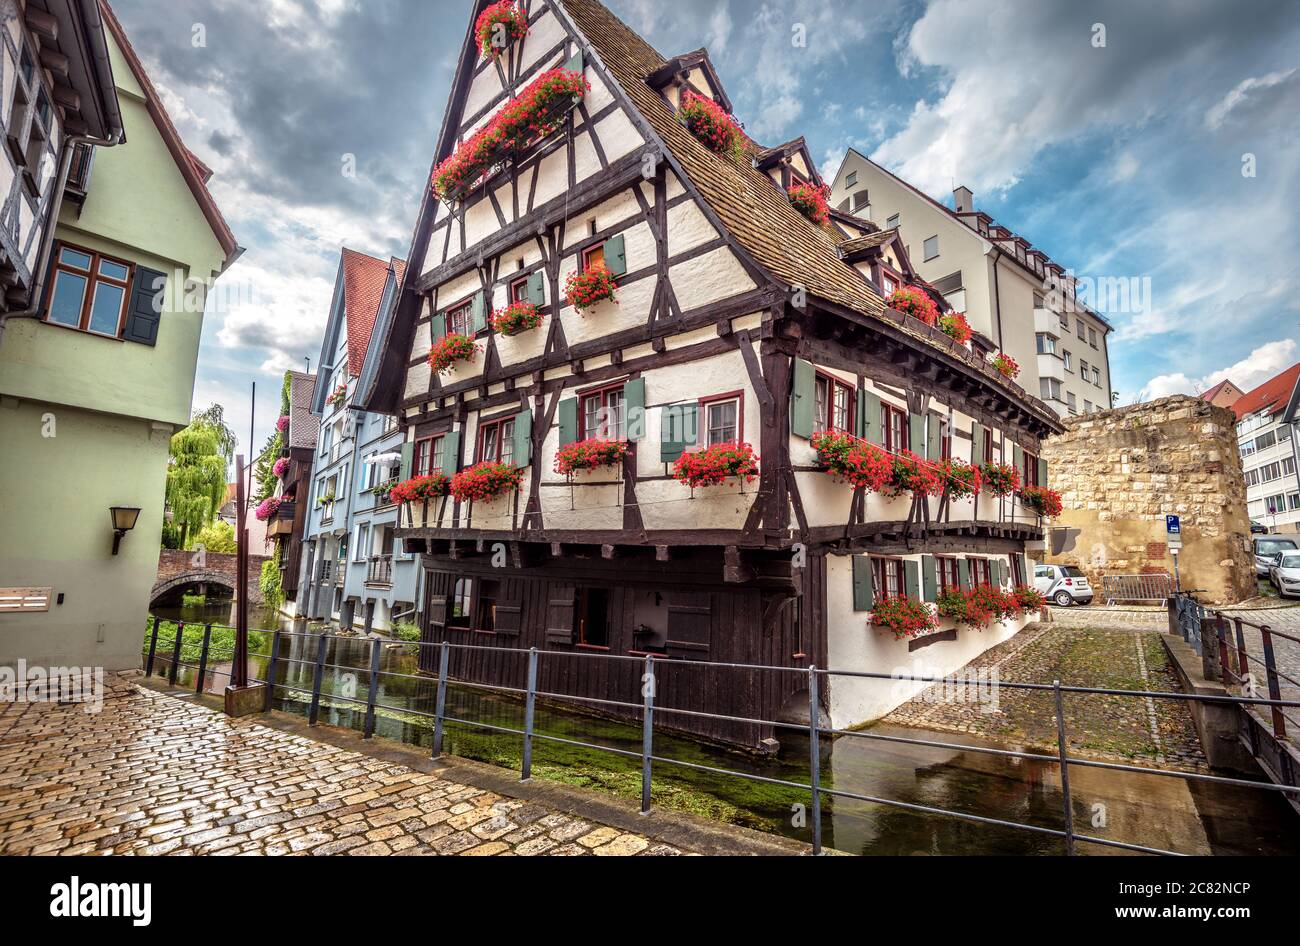 Hotel Schiefes Haus or Crooked House in Ulm city, Germany. It is landmark of Ulm located in old Fisherman`s Quarter. Swabian vintage half-timbered hou Stock Photo